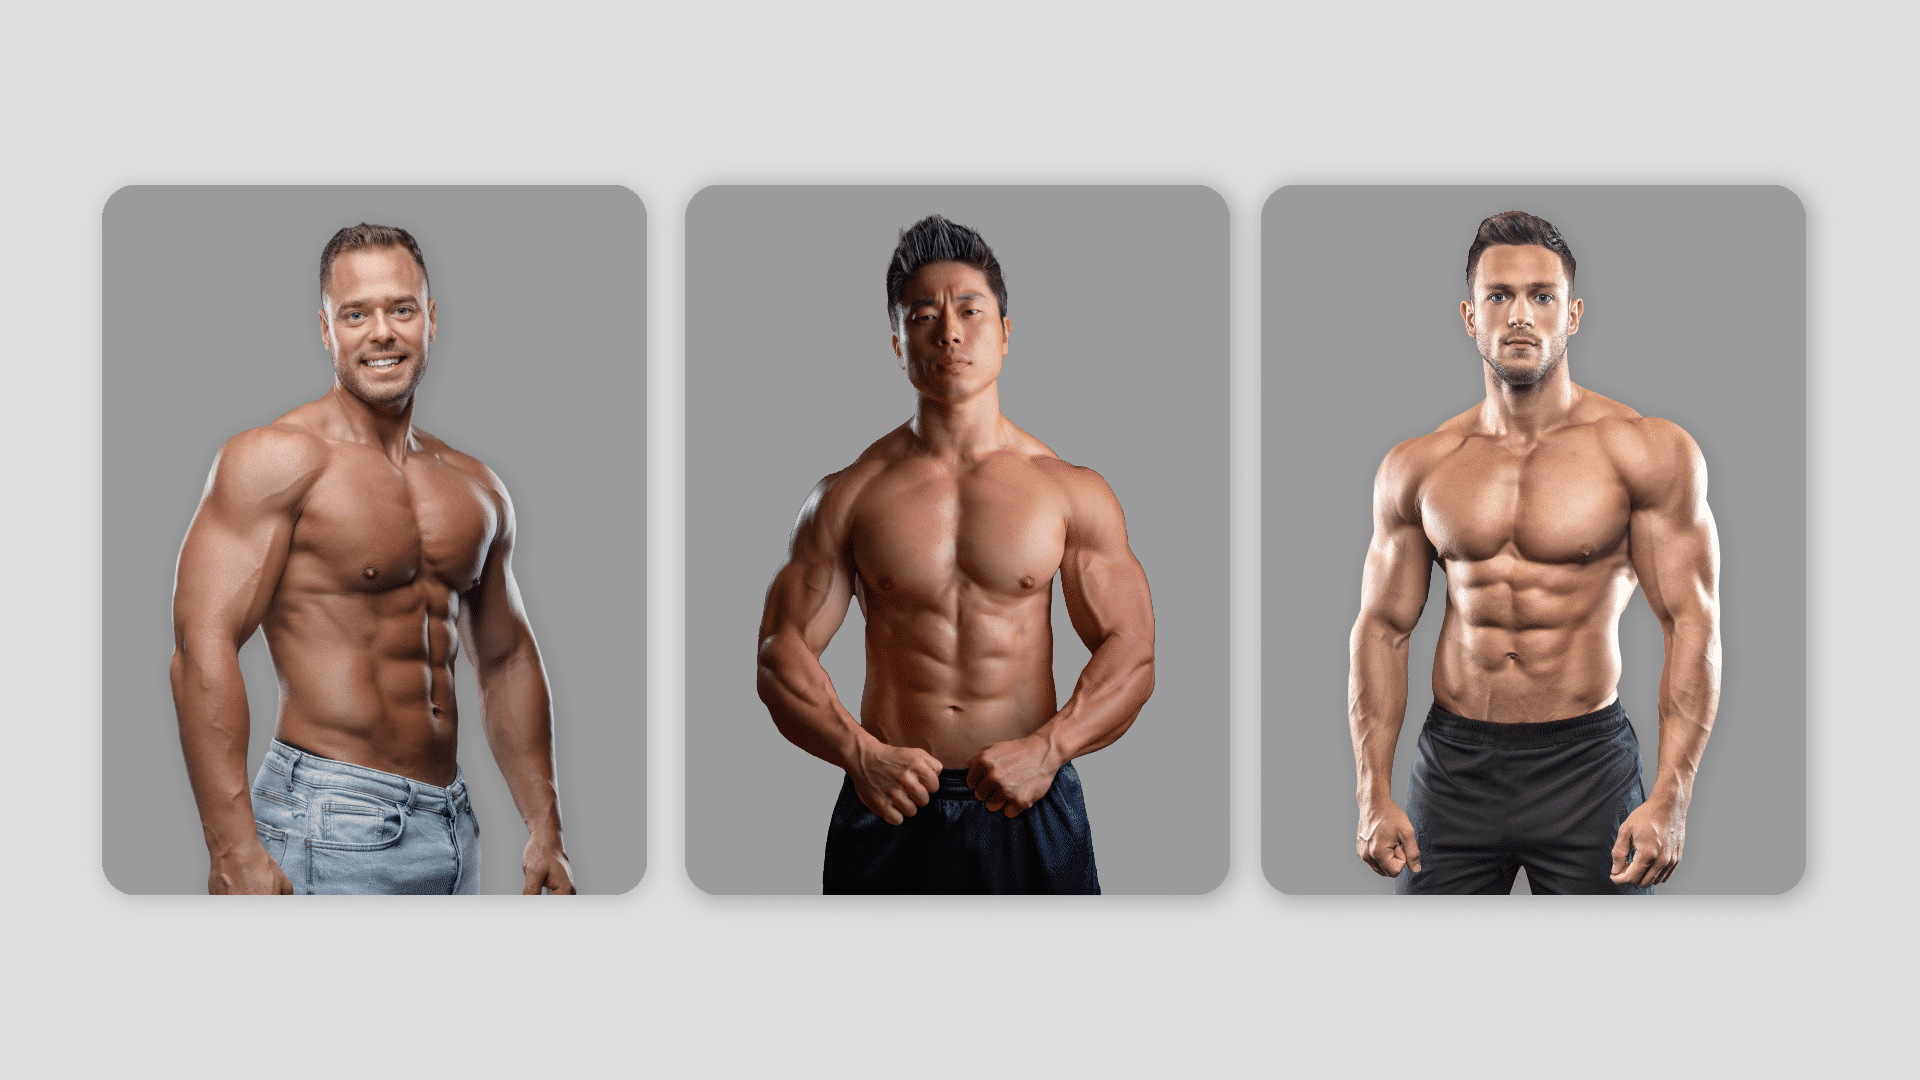 Are 8pack abs pure genetics? I've been doing calisthenics for